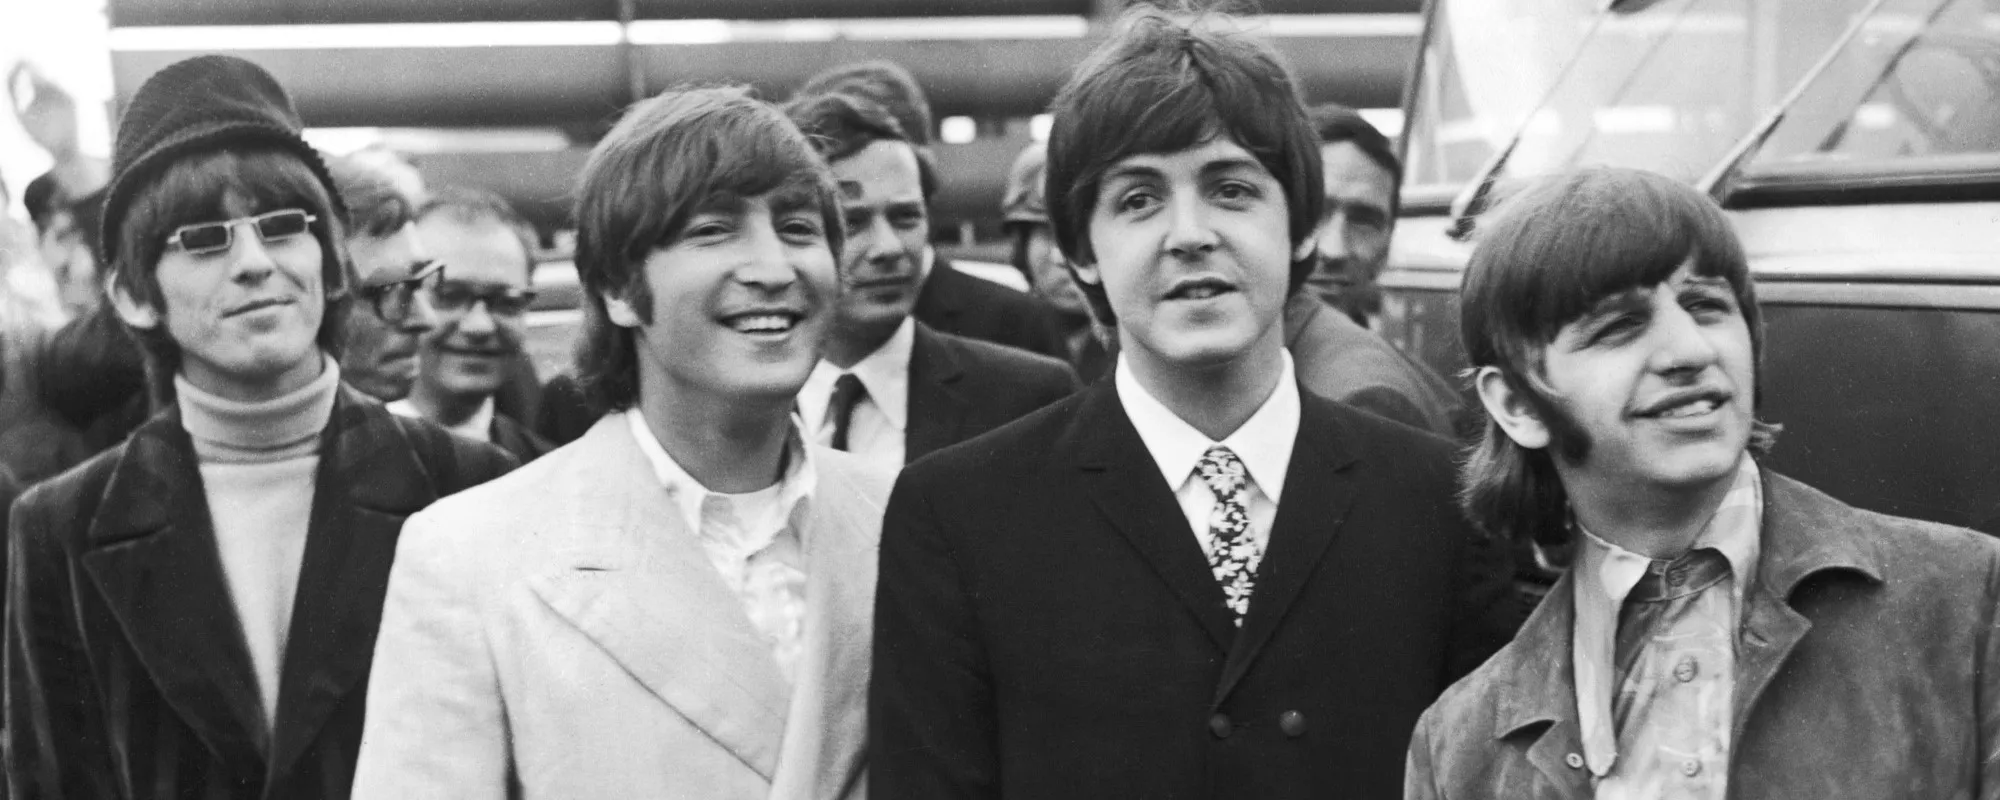 Unheard Beatles Audio Tapes Capturing Candid Fab Four Moments on 1966 Tour Being Auctioned